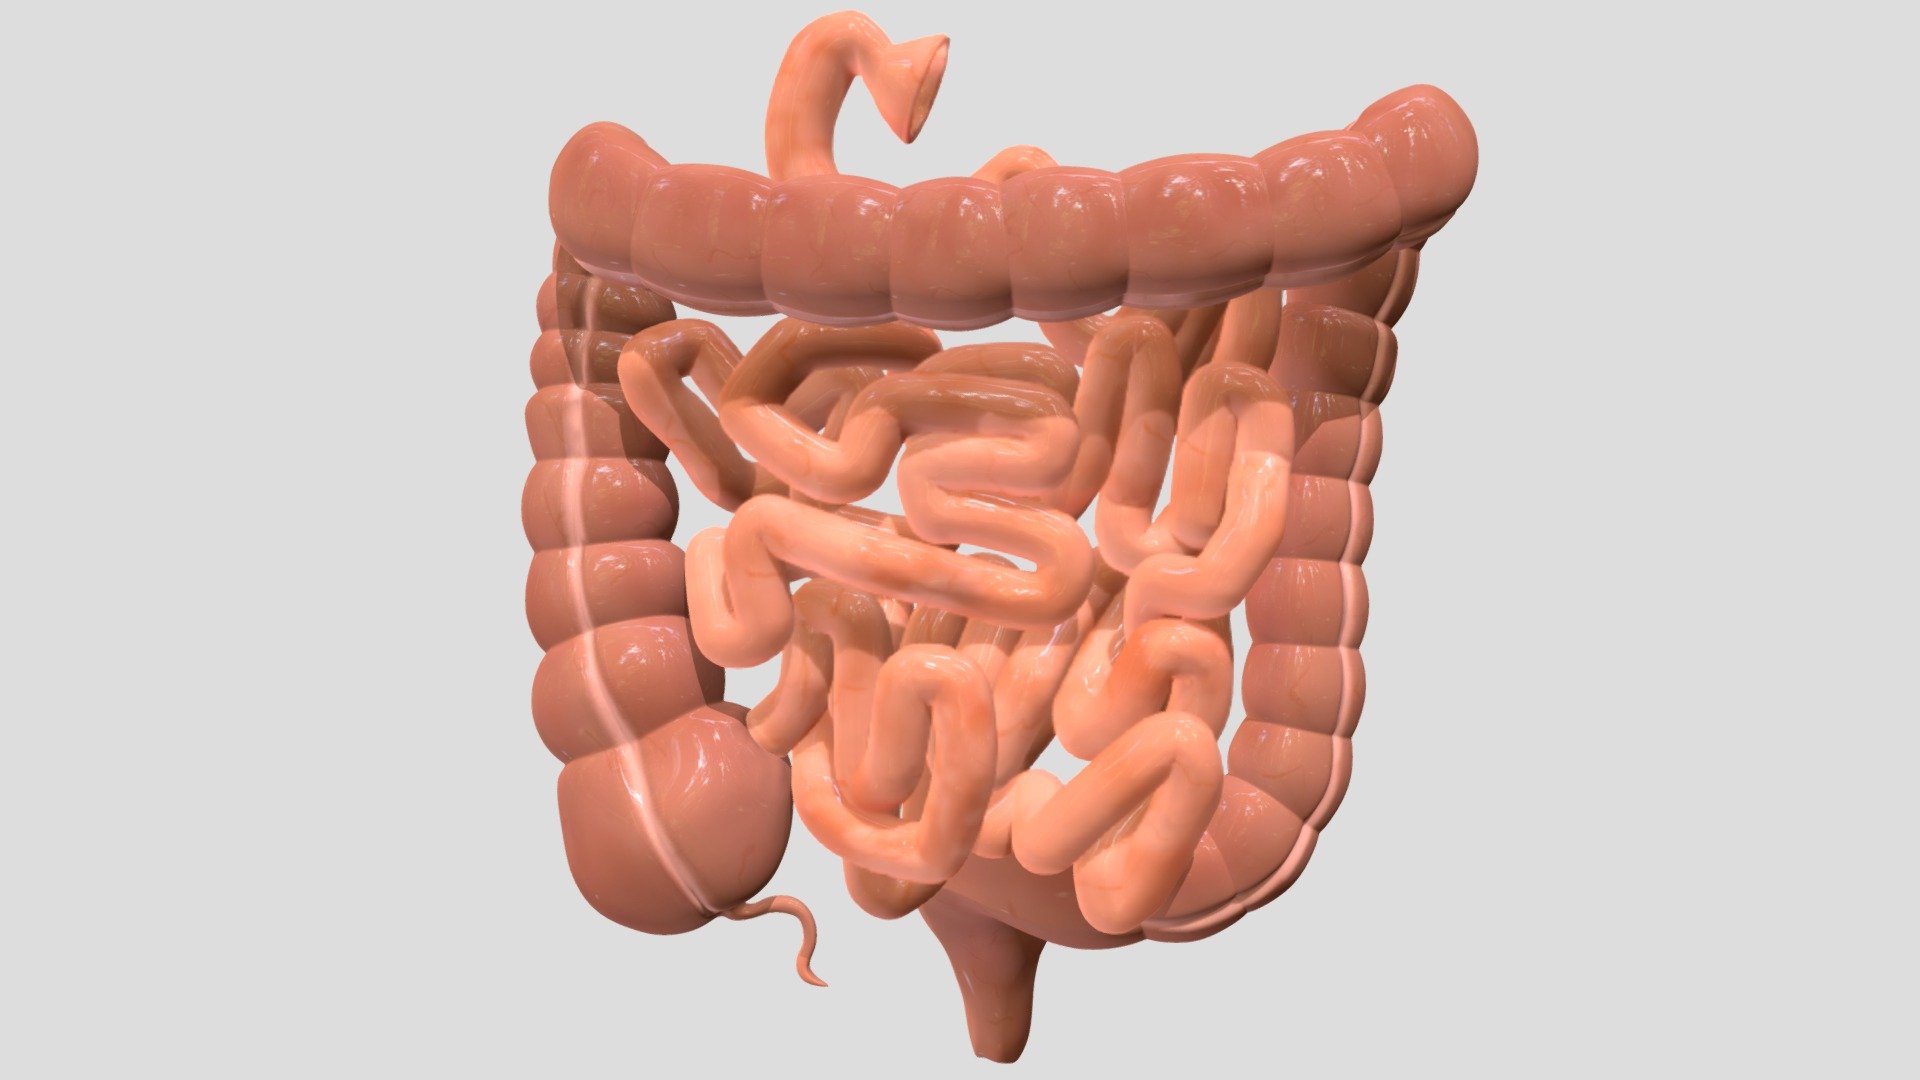 large and small intestine